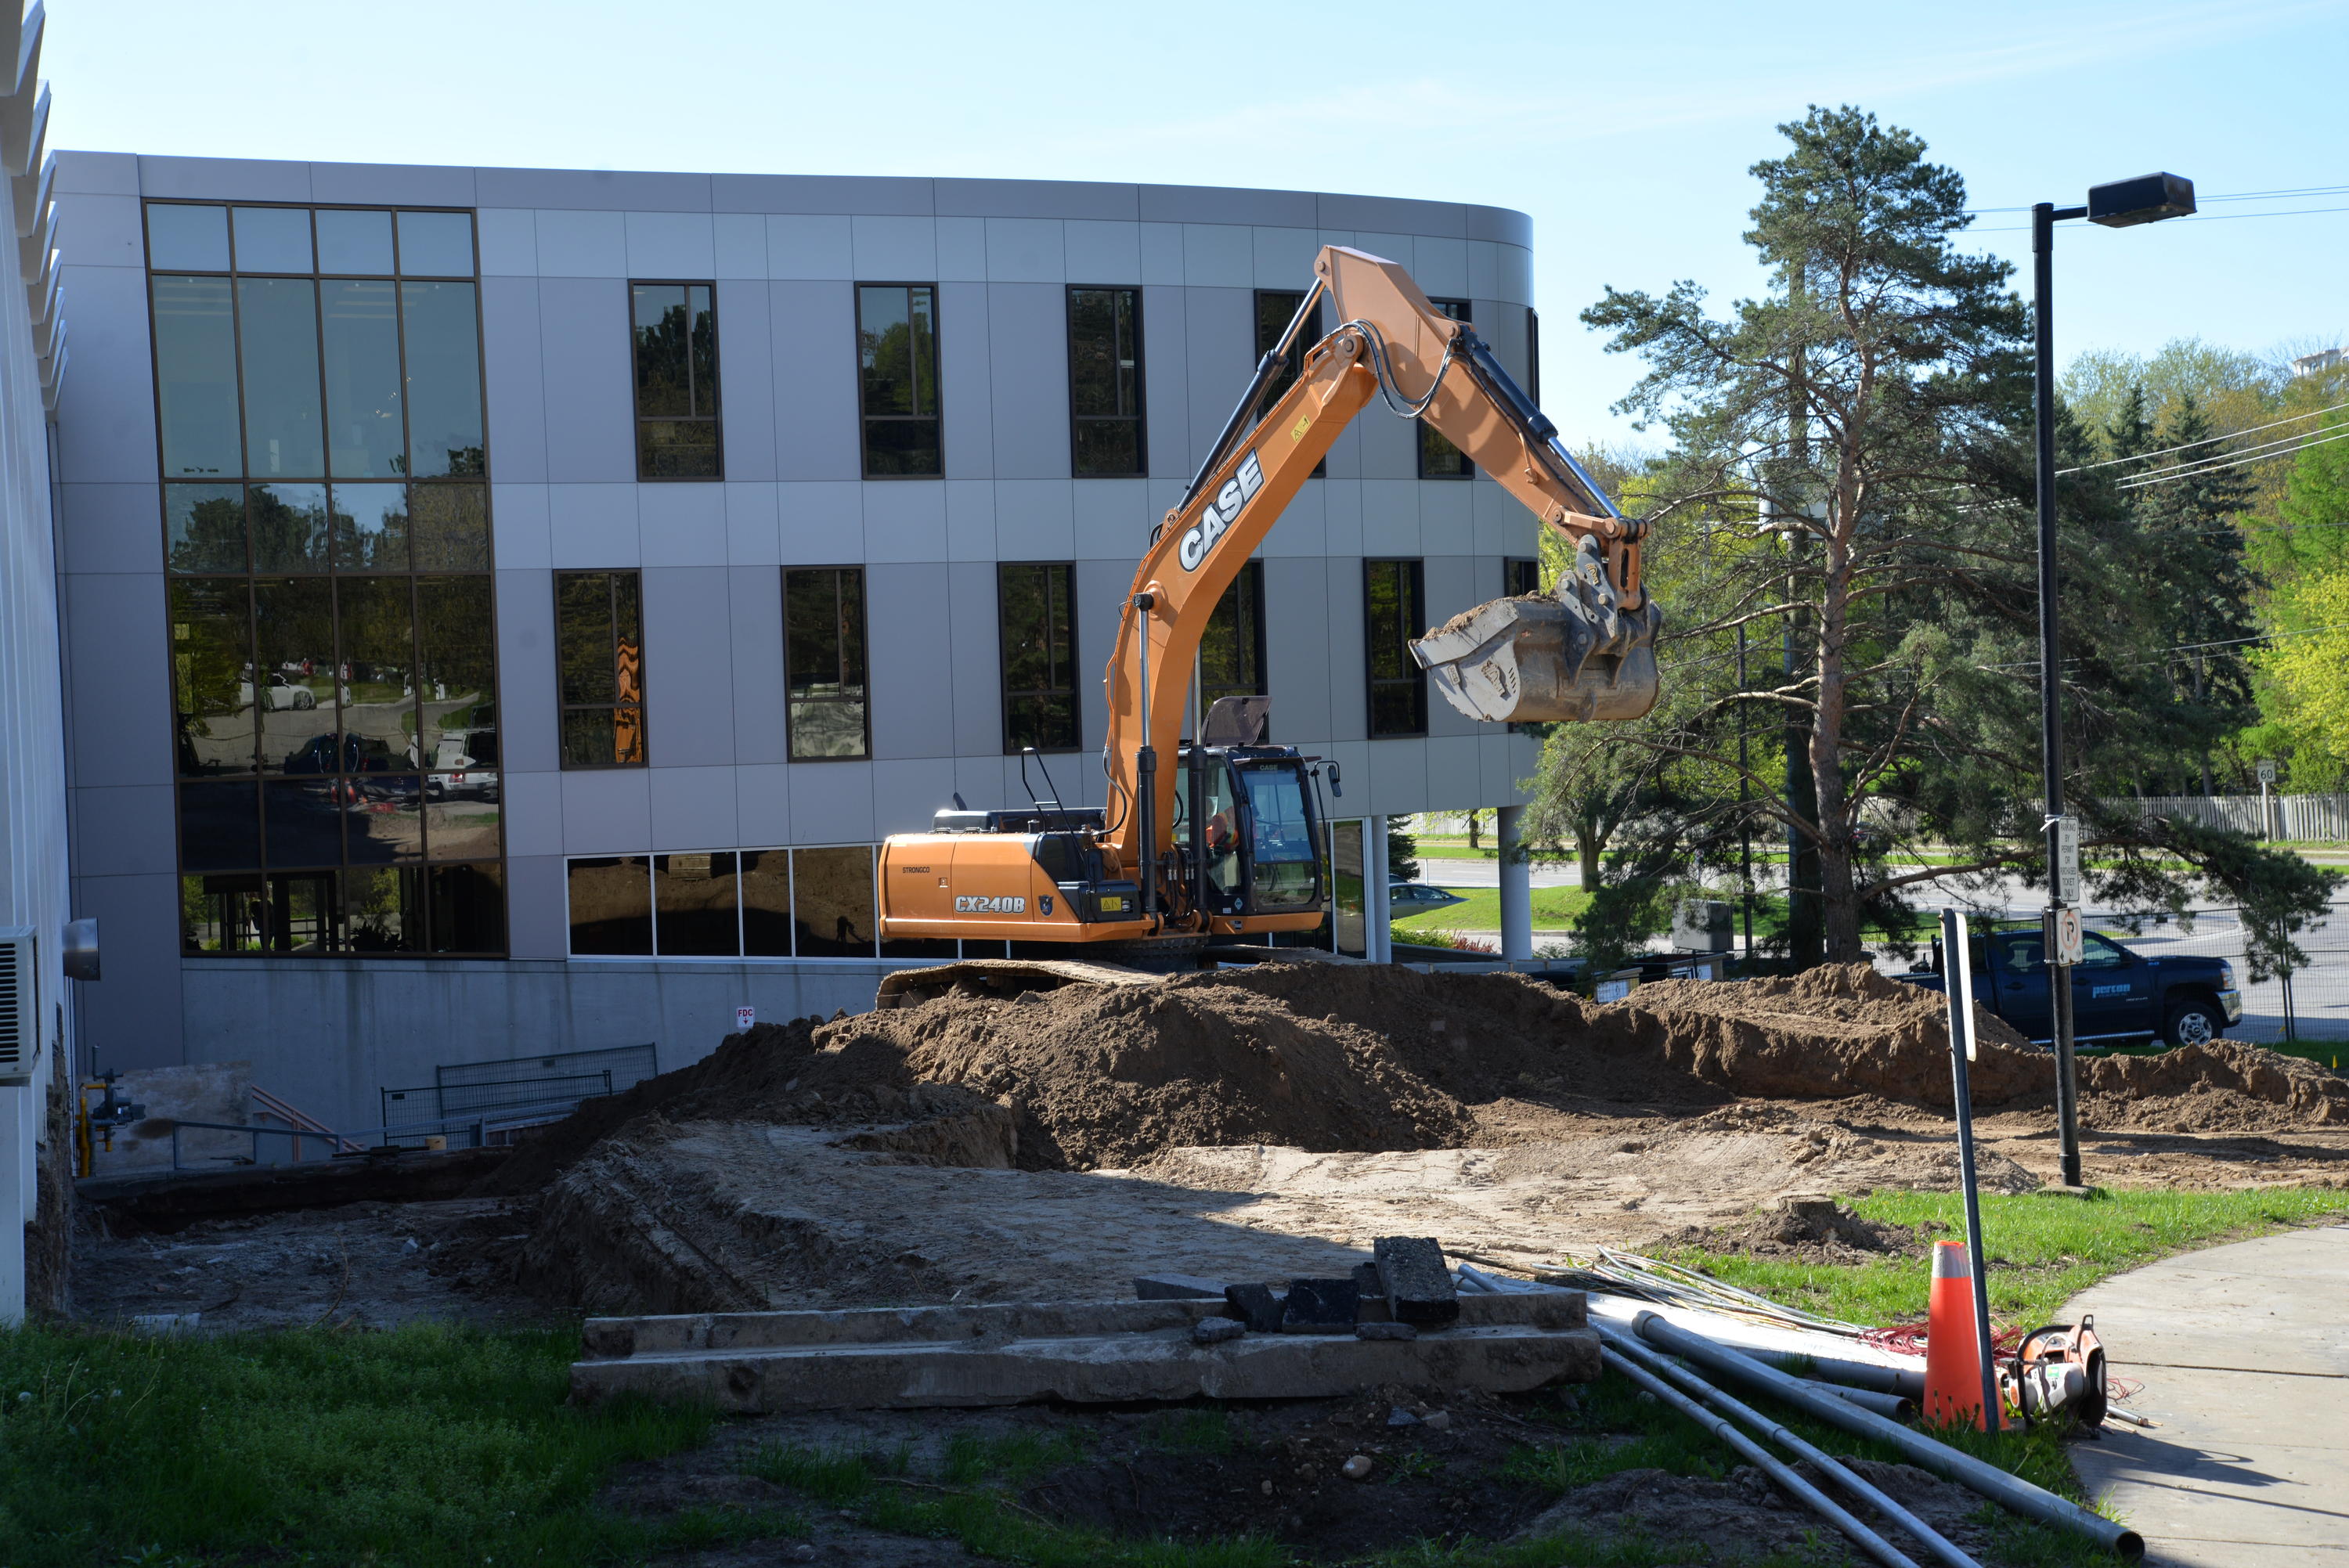 A backhoe begins digging on a bright sunny day